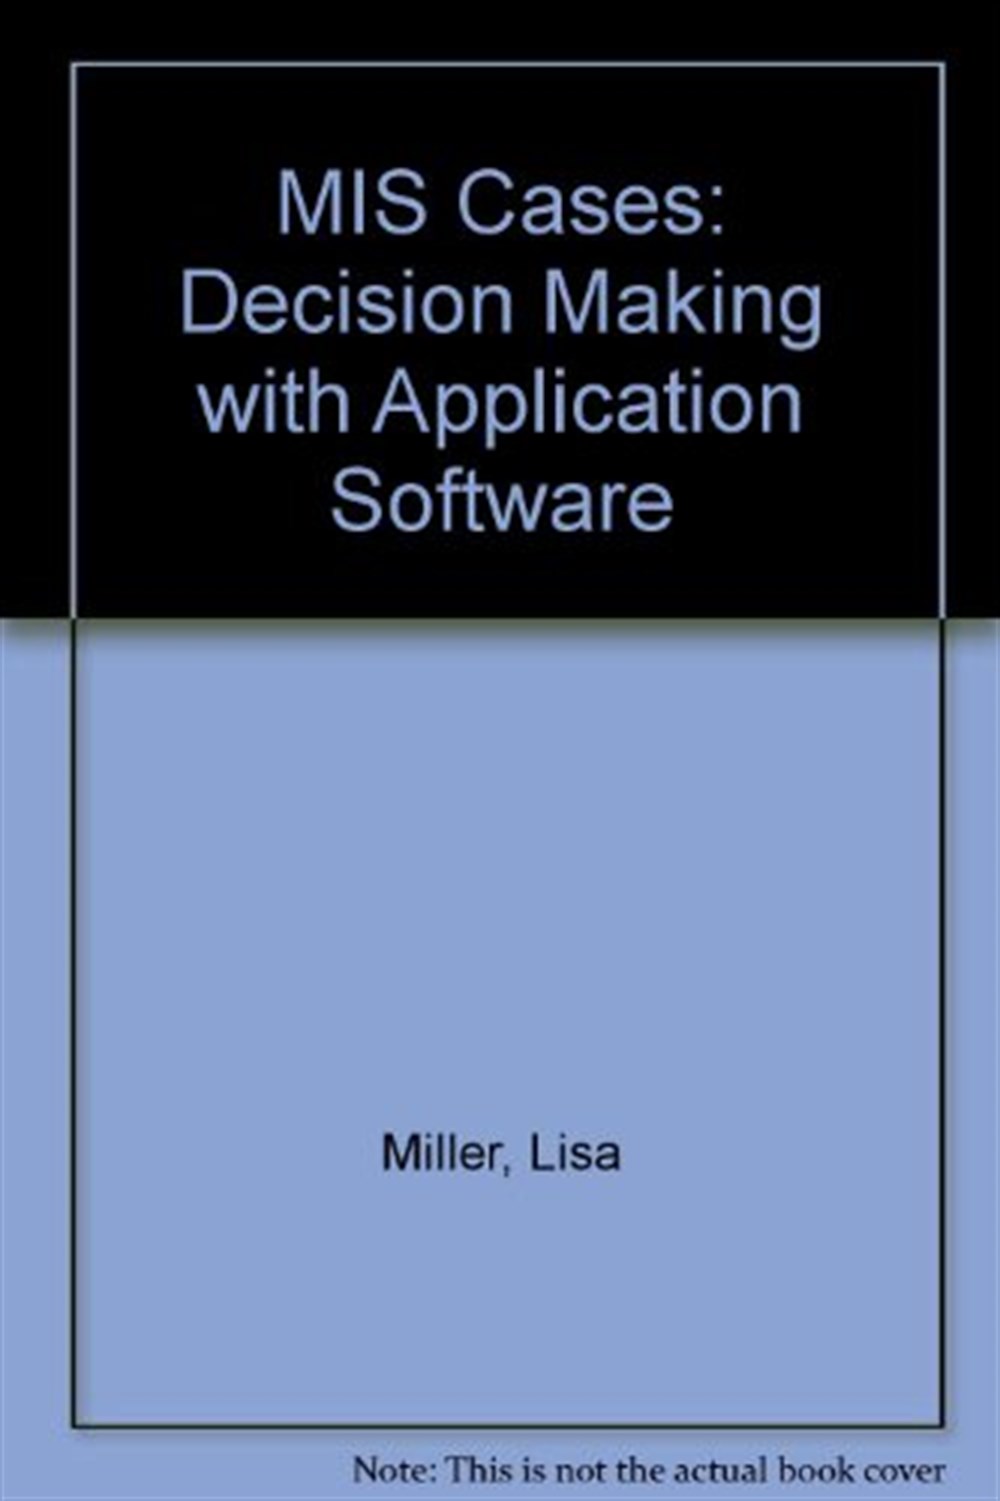 MIS Cases Decision Making wih Application Software, 4th Ed. (International Edition)